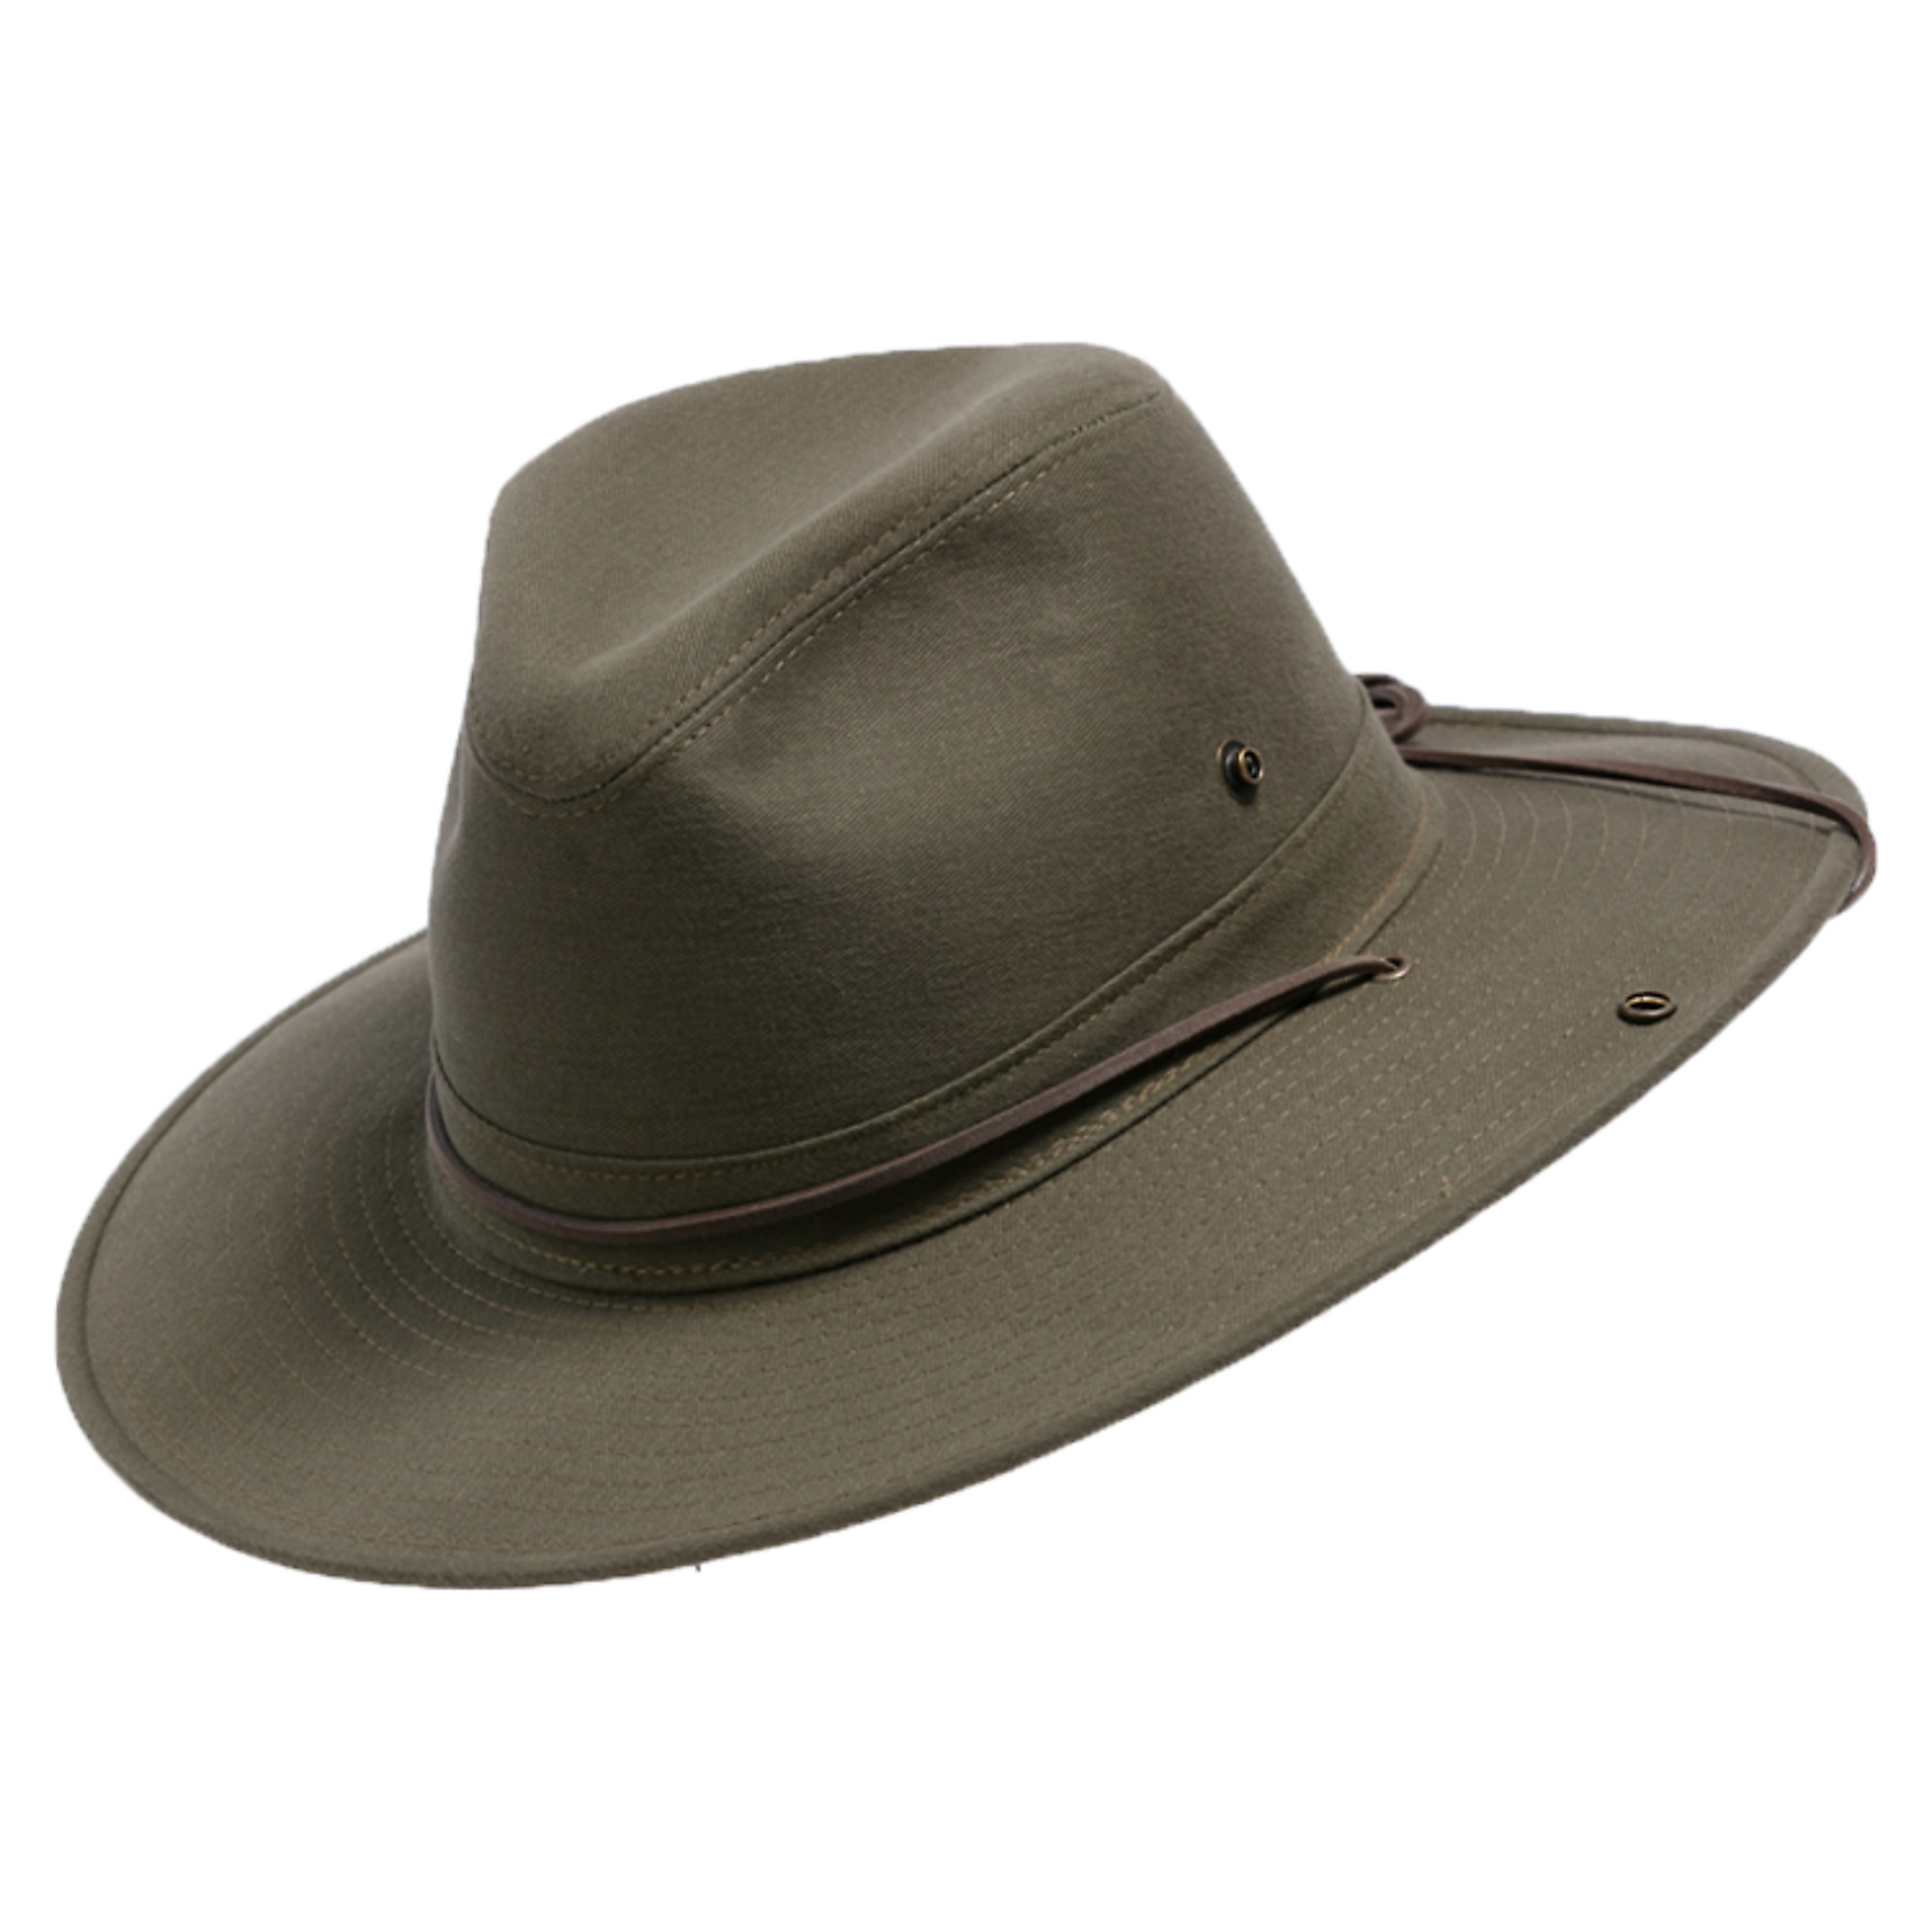 Henschel Hat Company, Olive Oswego Outdoor Hat, Size M, Color Olive, Hat Style Hat, Model 5336-36M